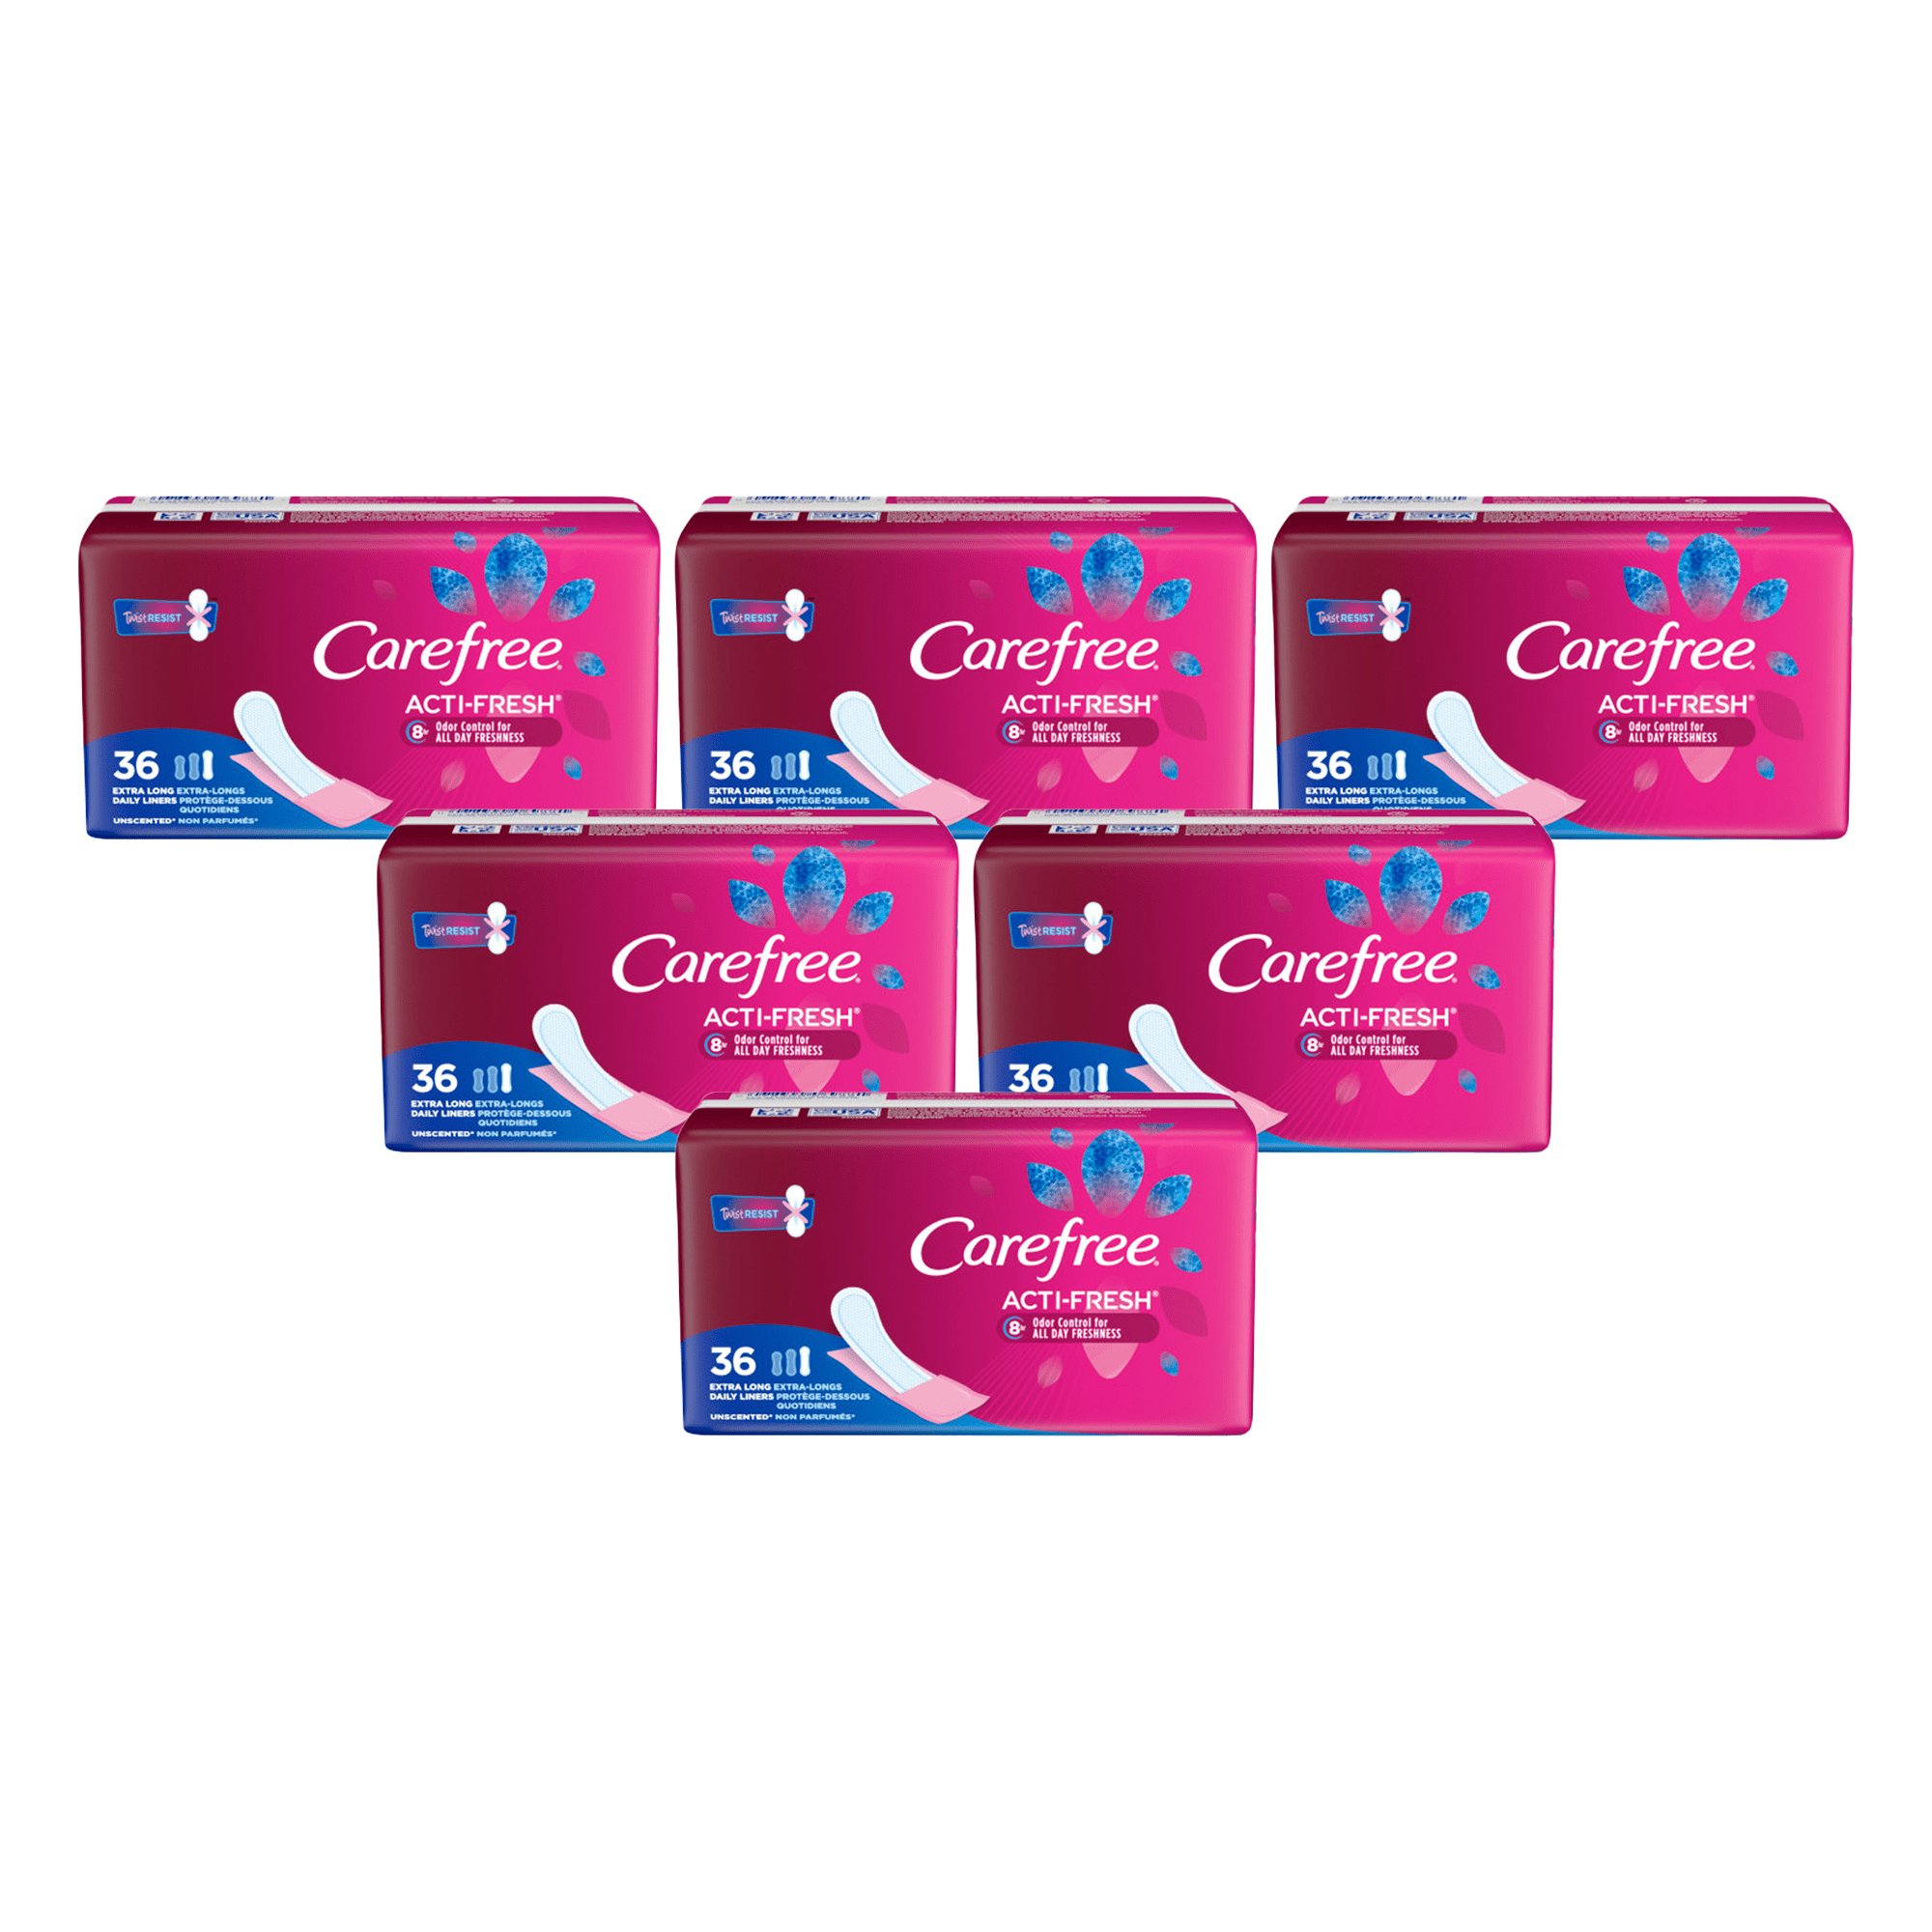 Carefree Acti-Fresh Extra Long Liners Unscented, 36 ea (Pack of 6) 